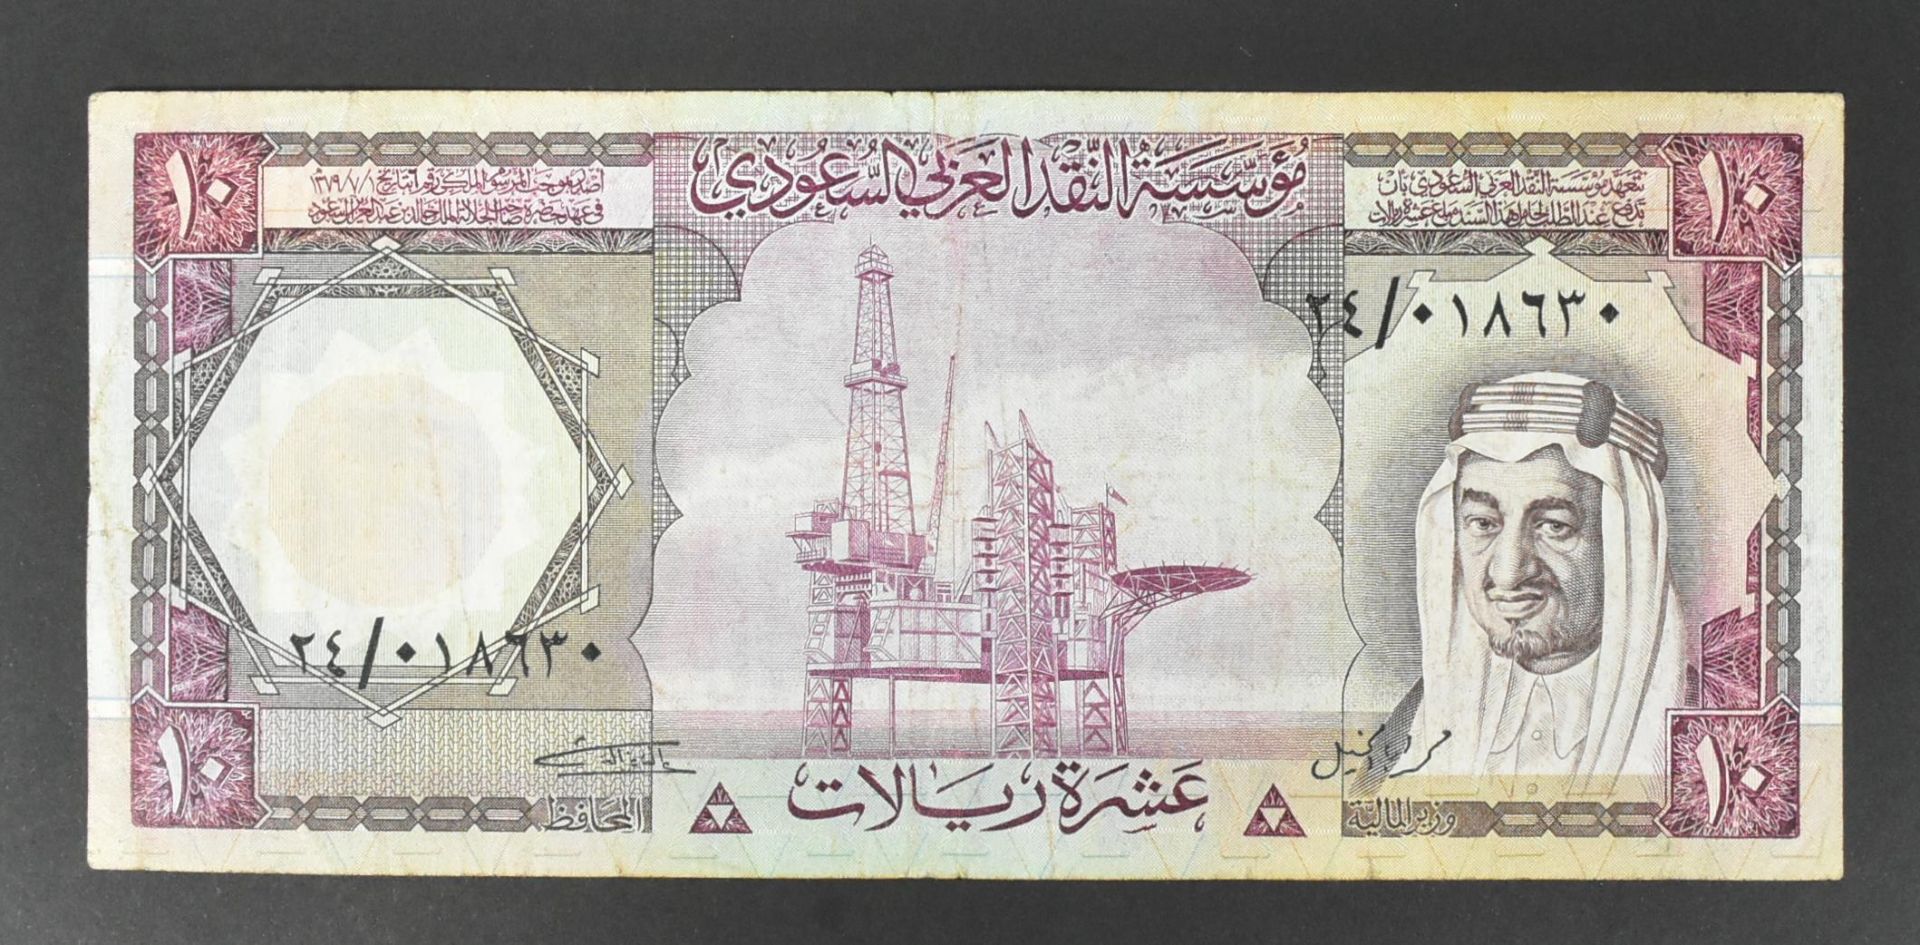 COLLECTION OF INTERNATIONAL UNCIRCULATED BANK NOTES - OMAN - Image 29 of 51